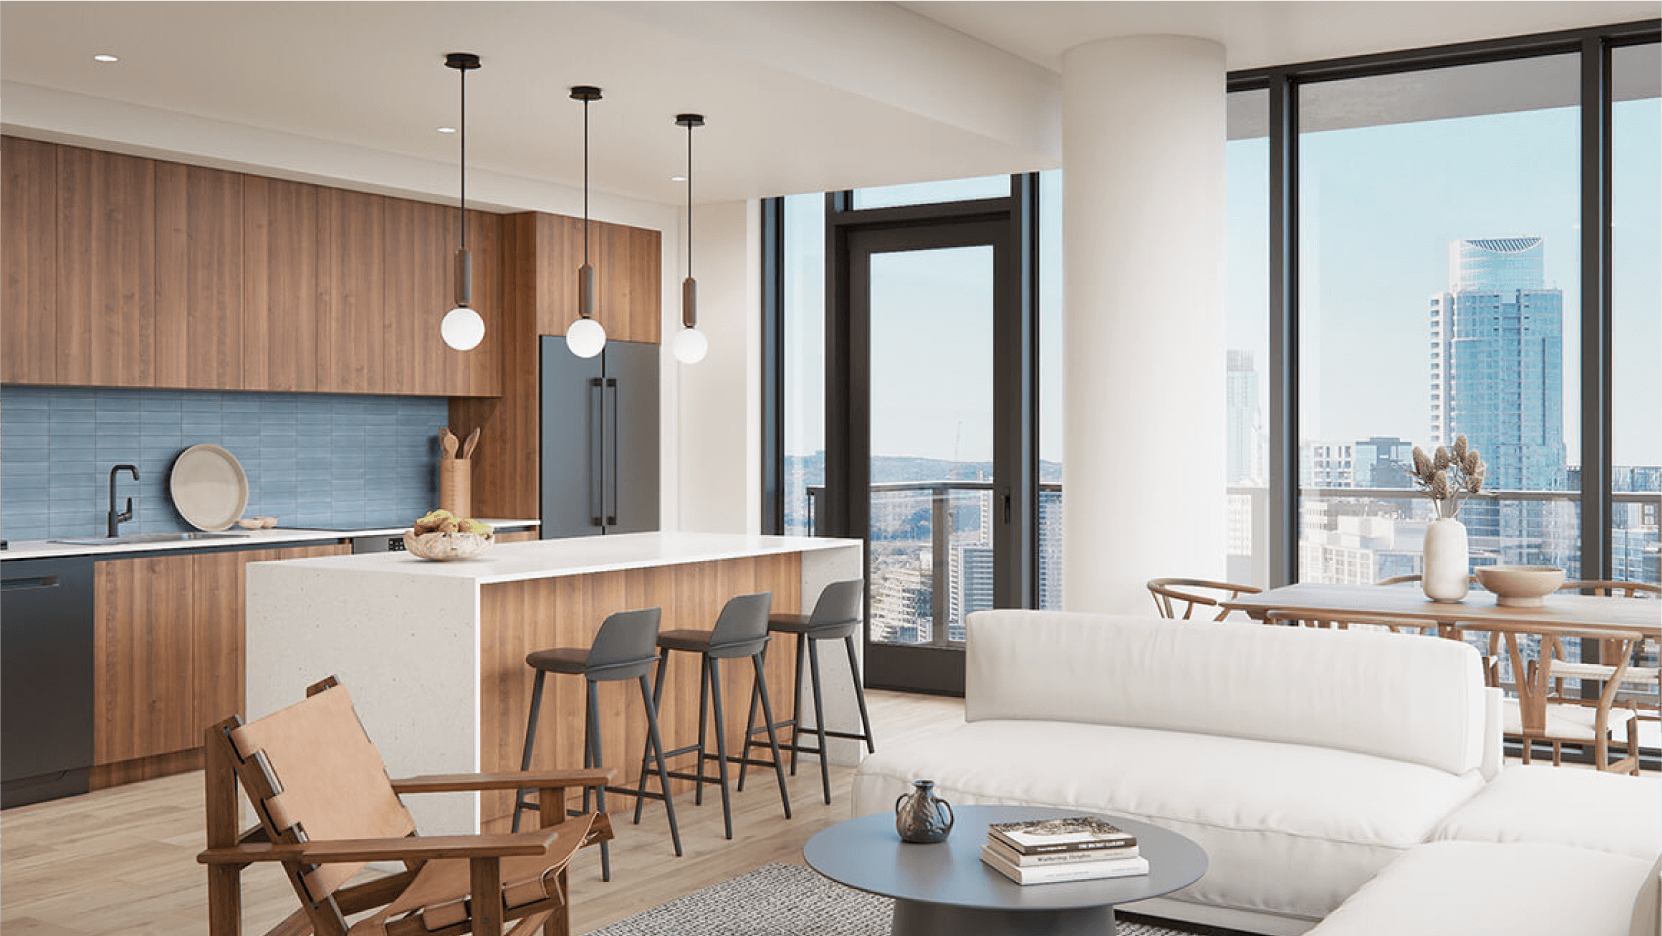 Stylish open-concept kitchen with wooden overhead cabinets, matching the living room's neutral-toned furniture, complemented by the natural light from surrounding windows.